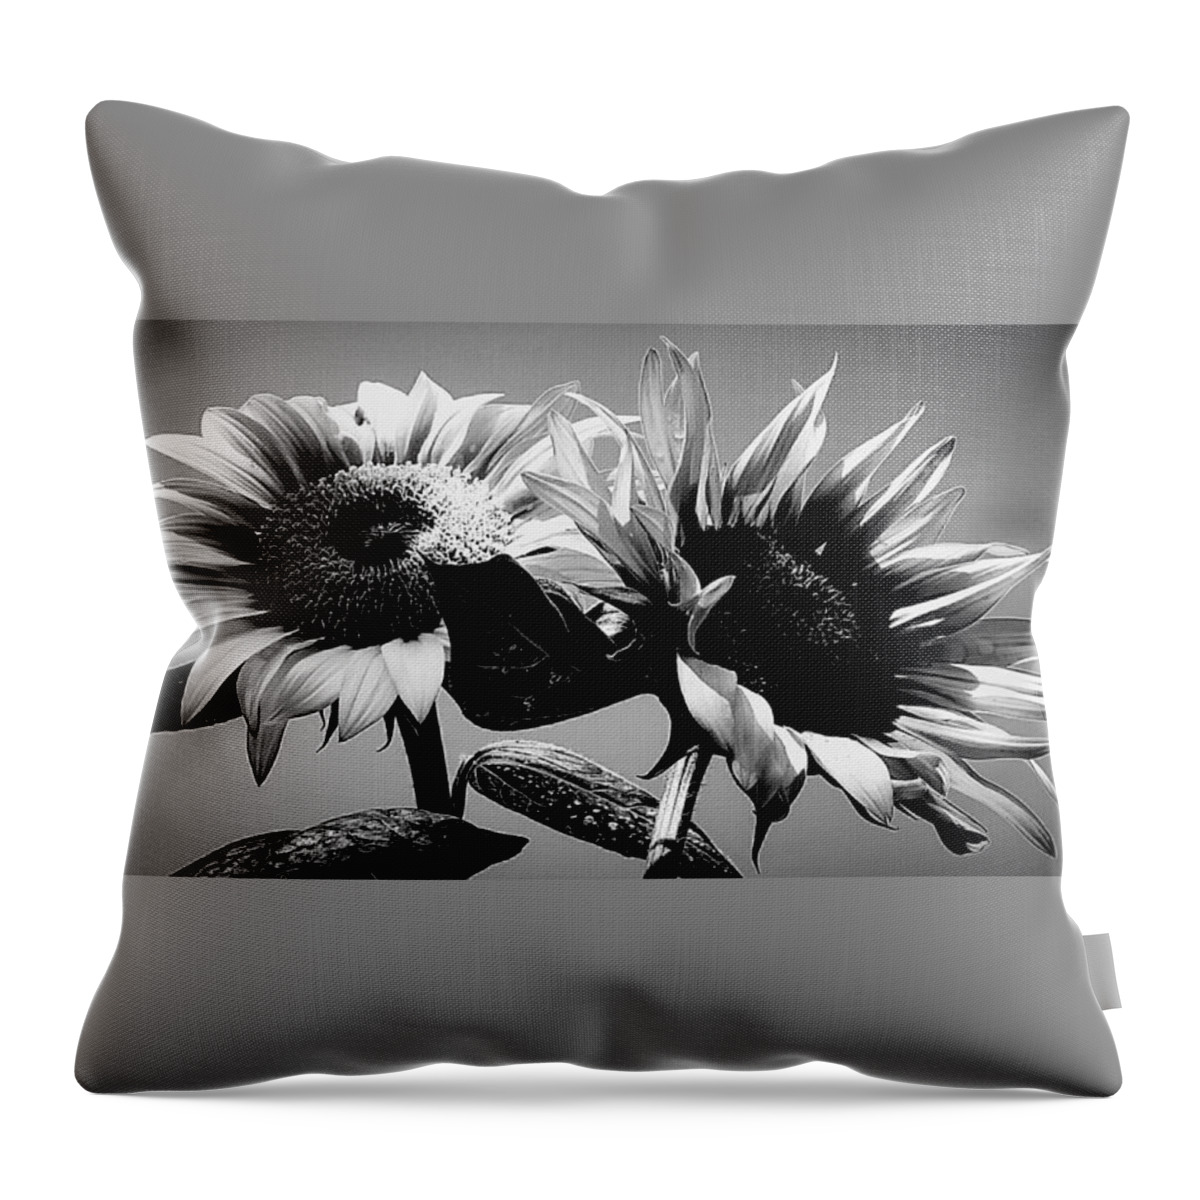 Black And White Throw Pillow featuring the photograph Sunflower Duo BW by Alexis King-Glandon